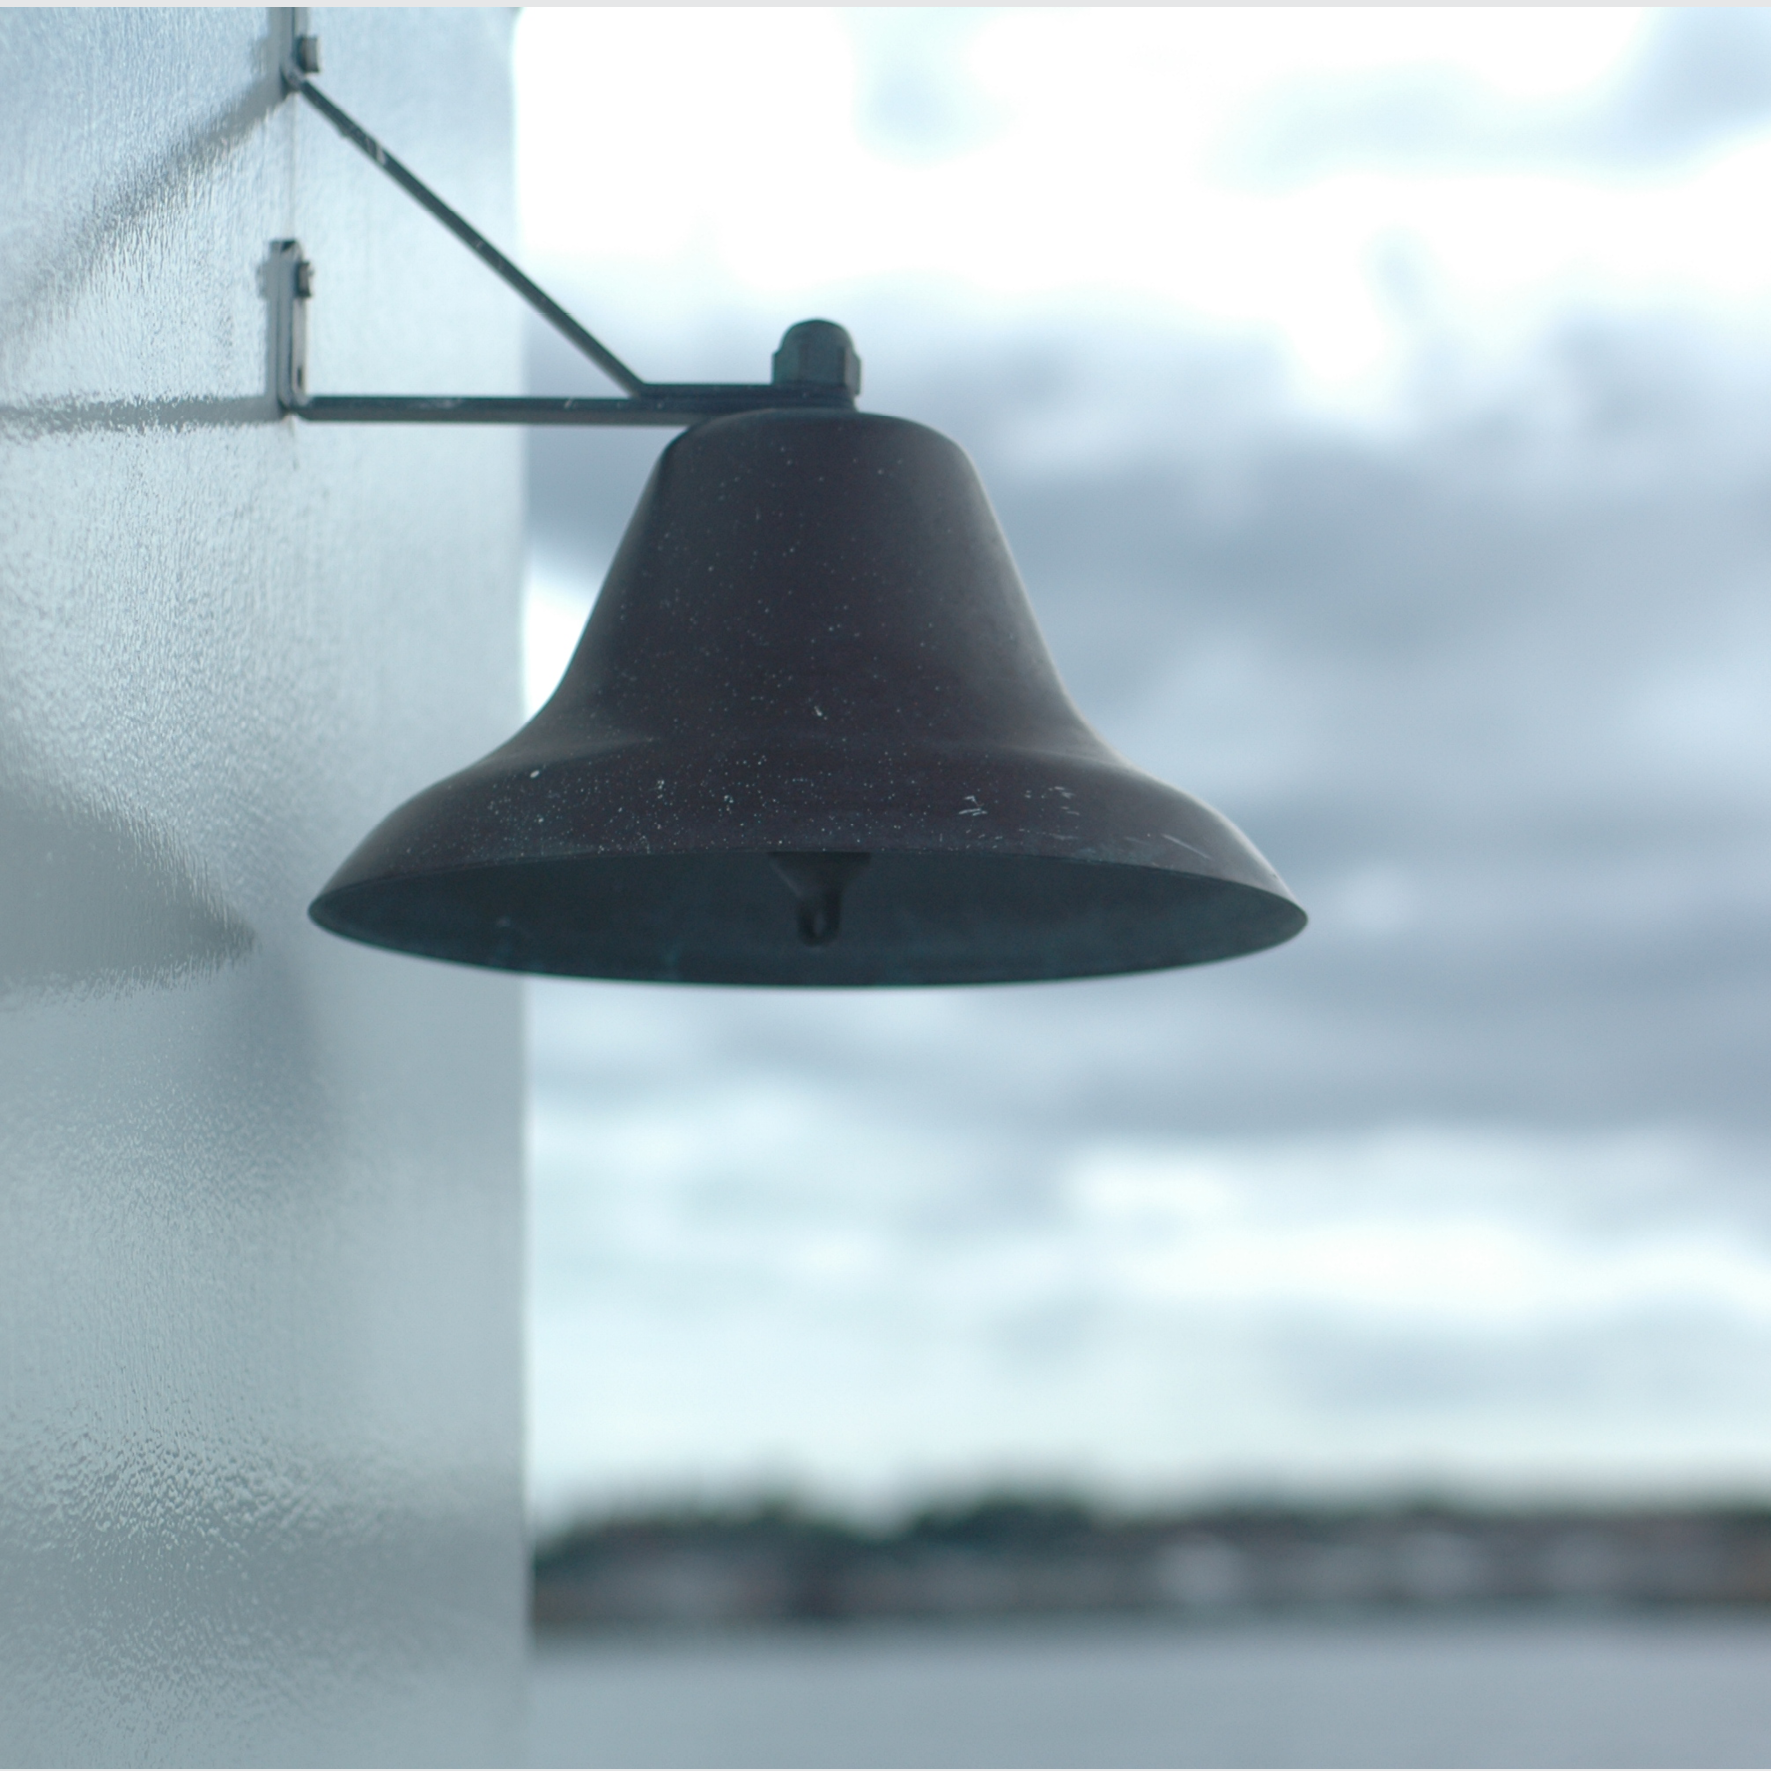 Small weathered bell on a building on a Maine island, with blurred view of ocean water